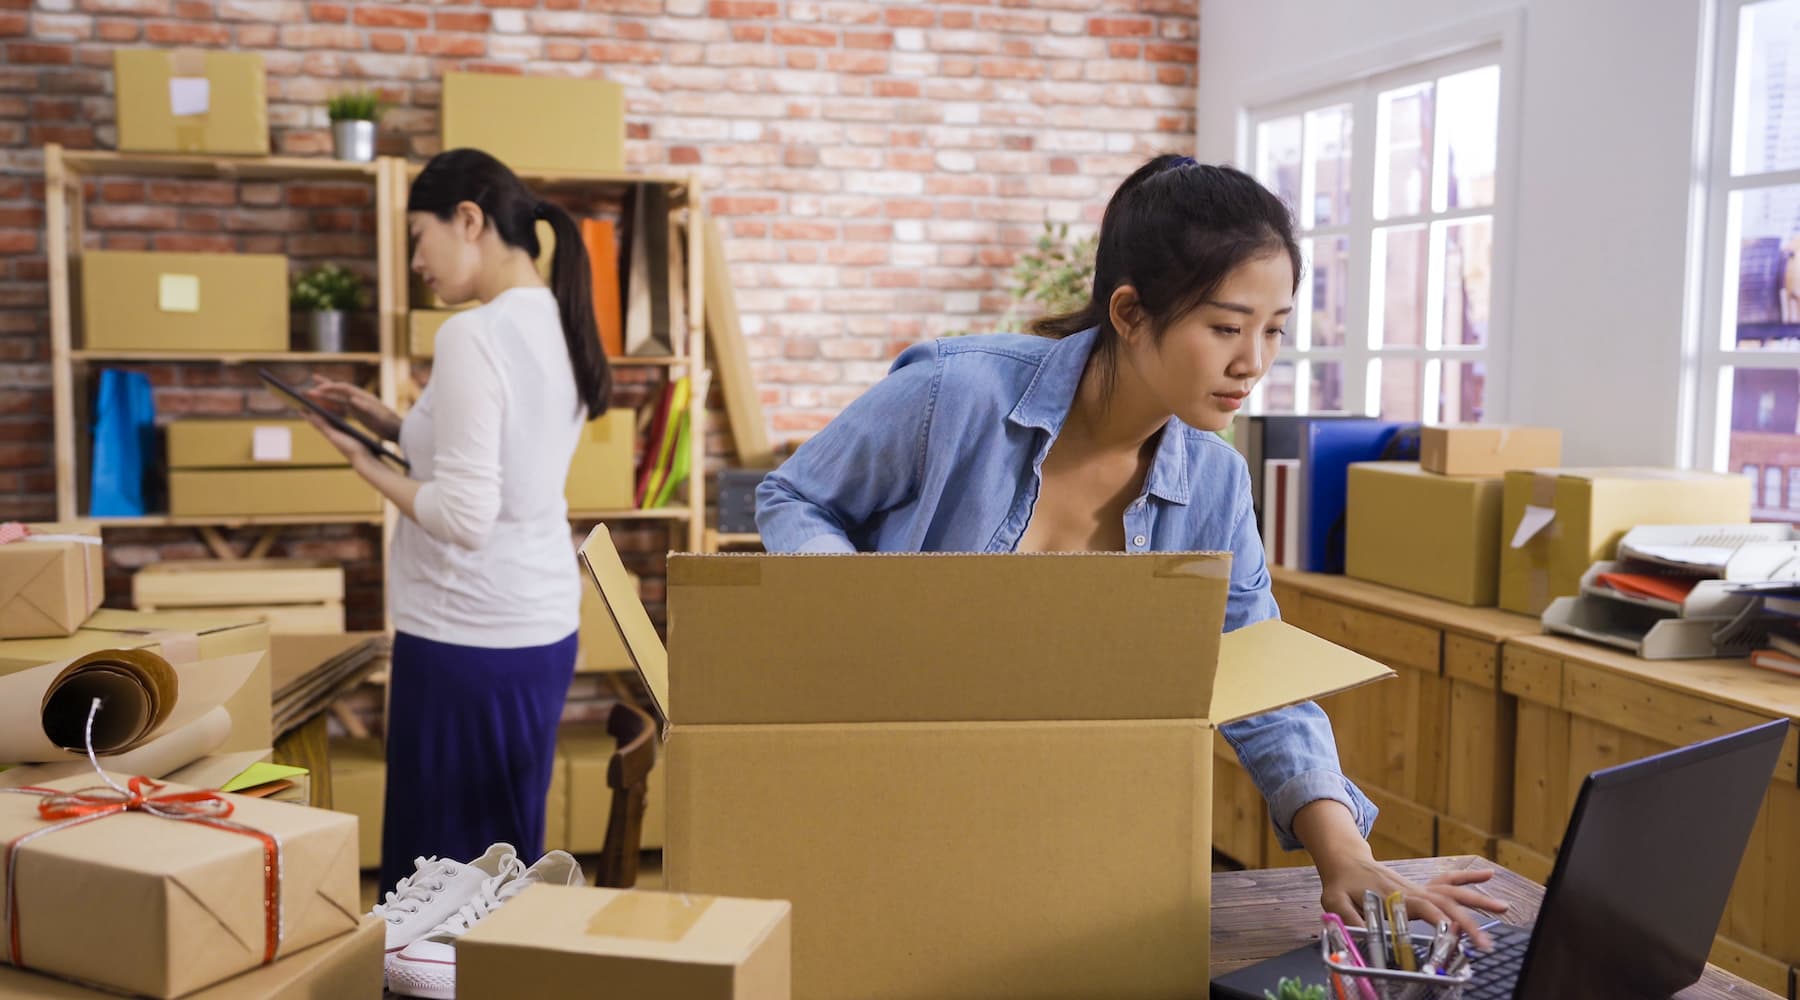 Two women business owners packing products for shipment